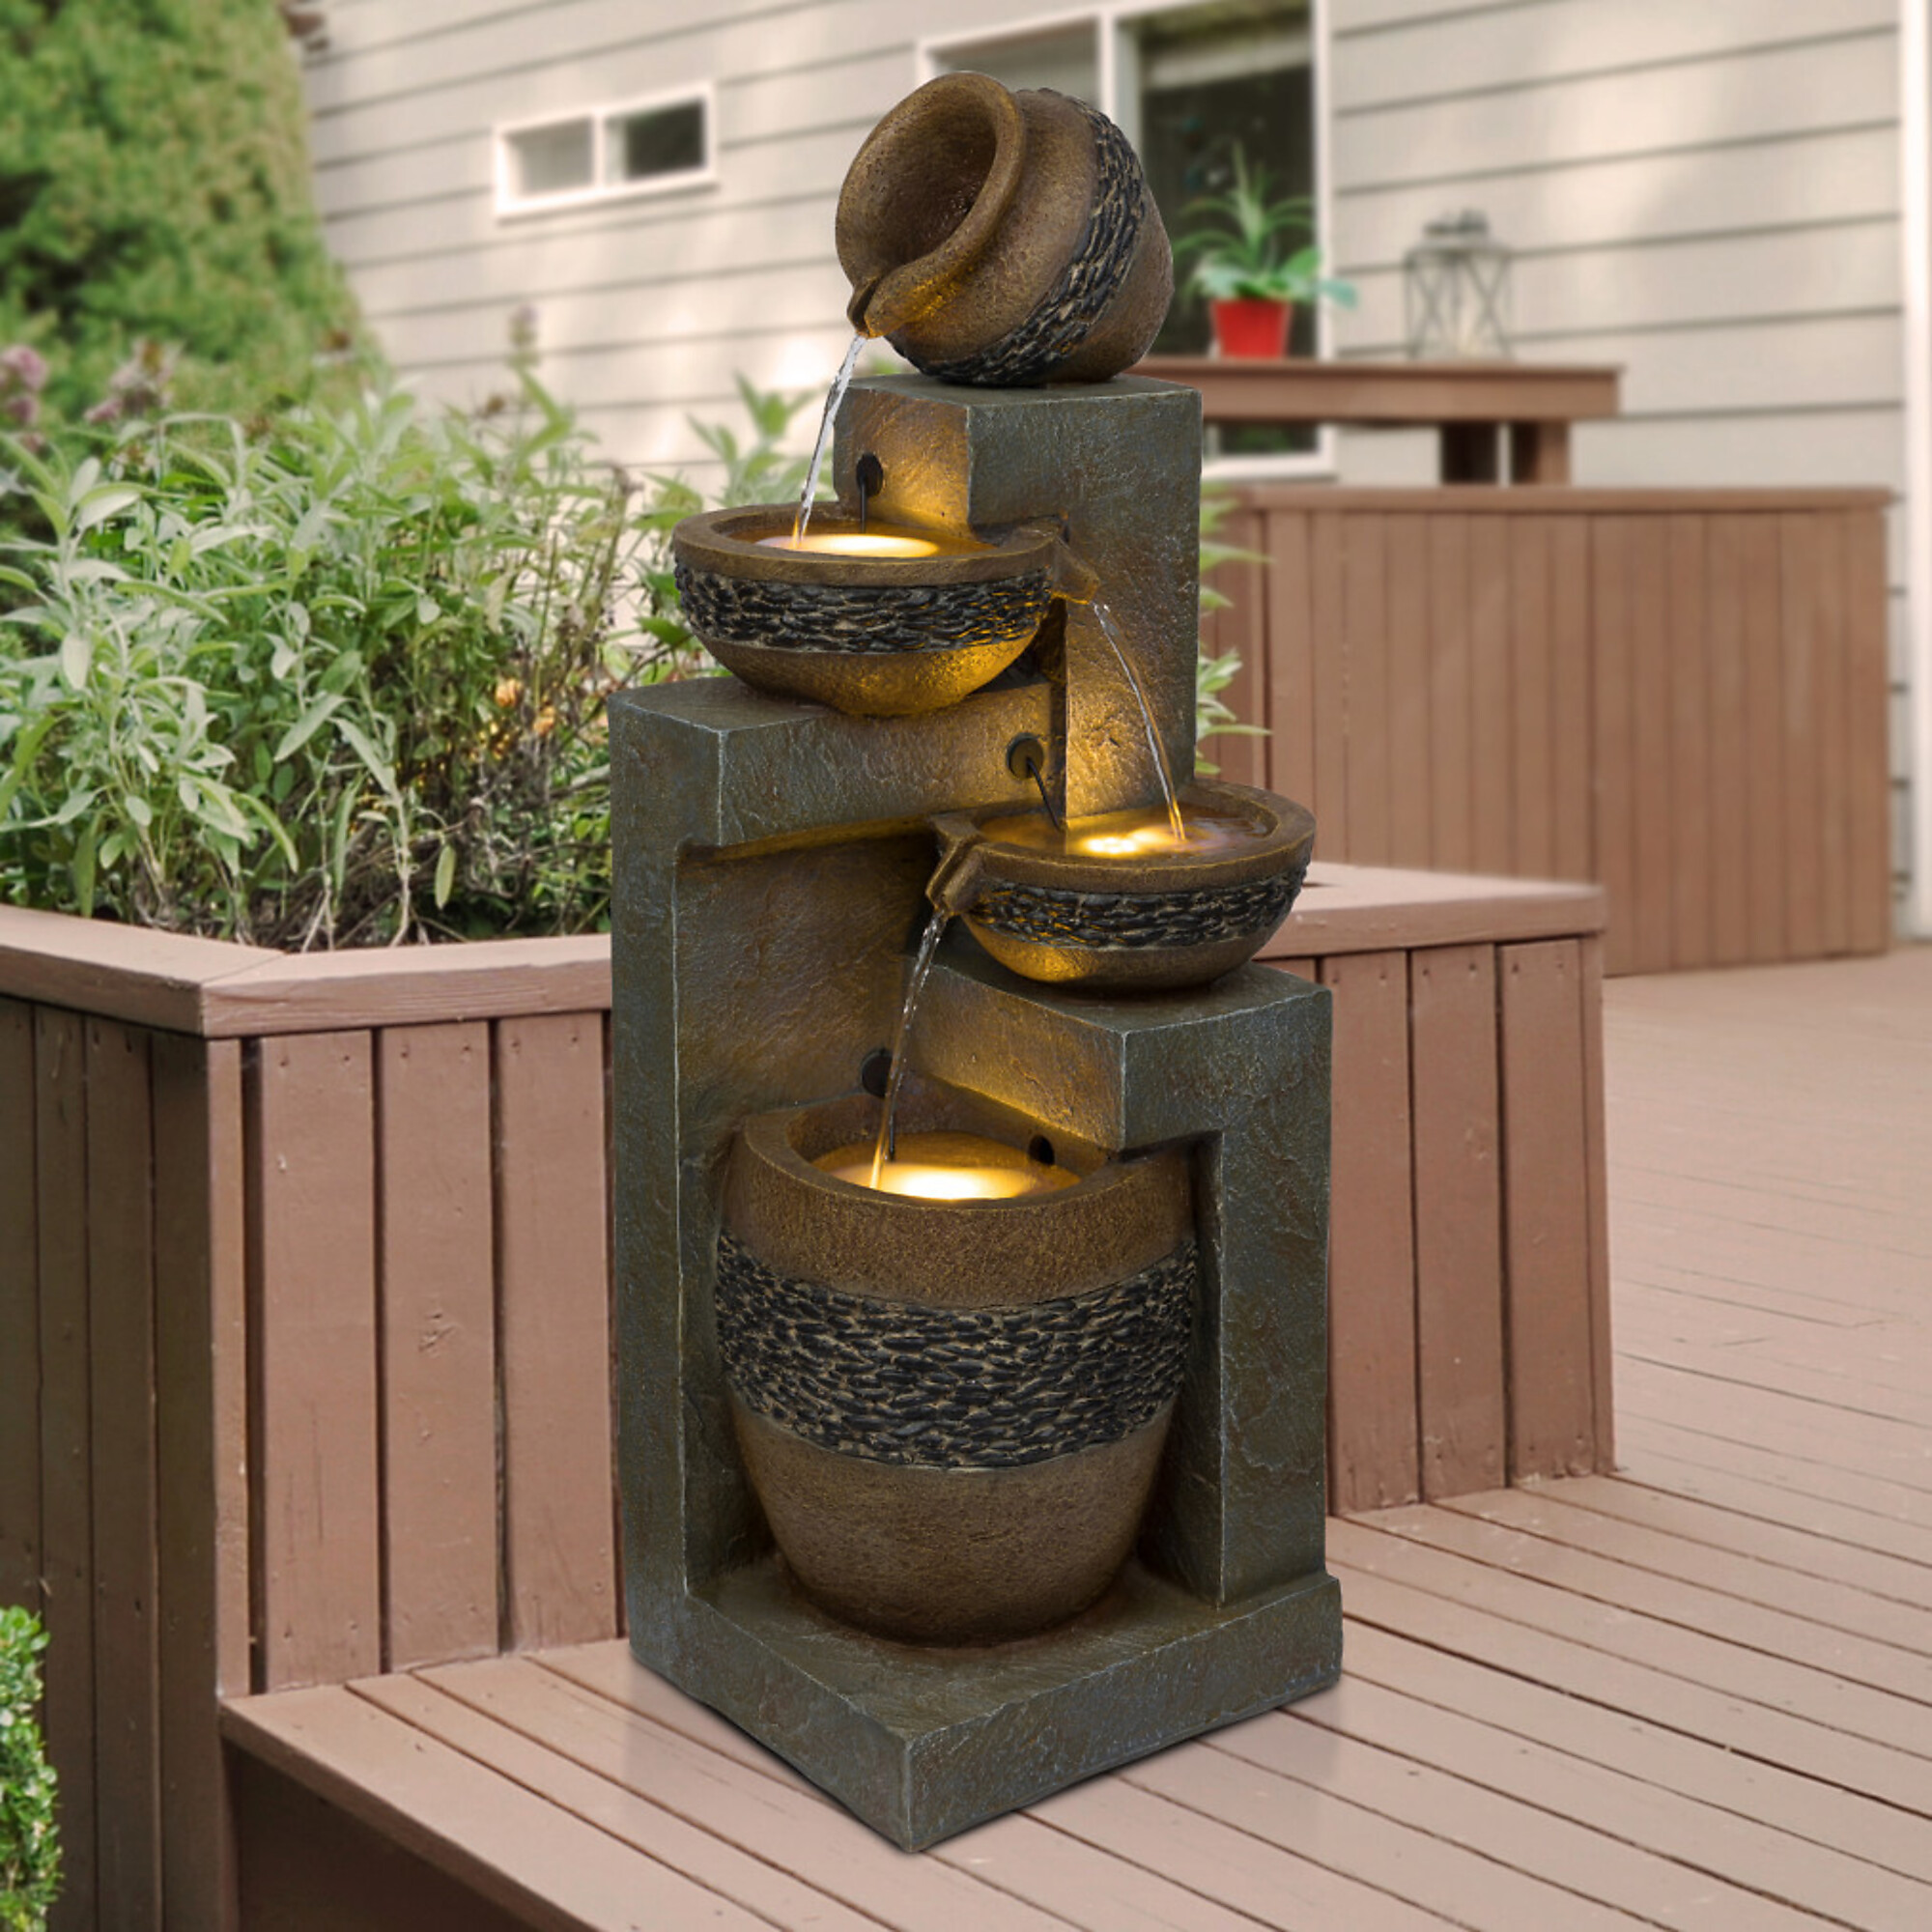 Alpine Corporation, Pots with Stones Fountain with LED Lights,4 Tier, Volts 120 Power Cord Length 6 ft, Model TVH244